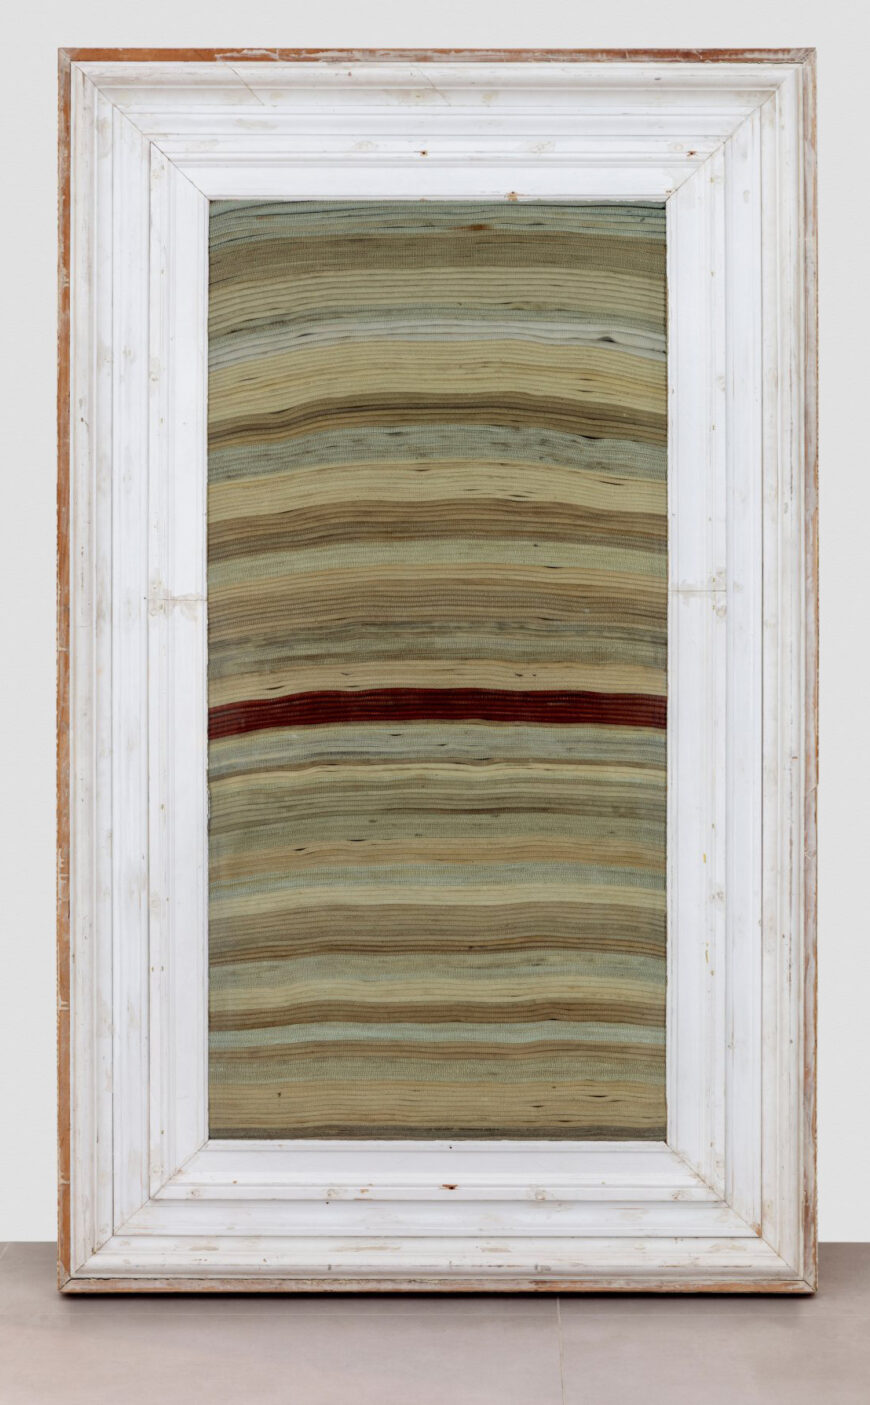 Theaster Gates, In The Event of a Race Riot, 2011, wood, hose, and glass, in artist's frame, 191.8 x 116.8 cm (private collection) © Theaster Gates